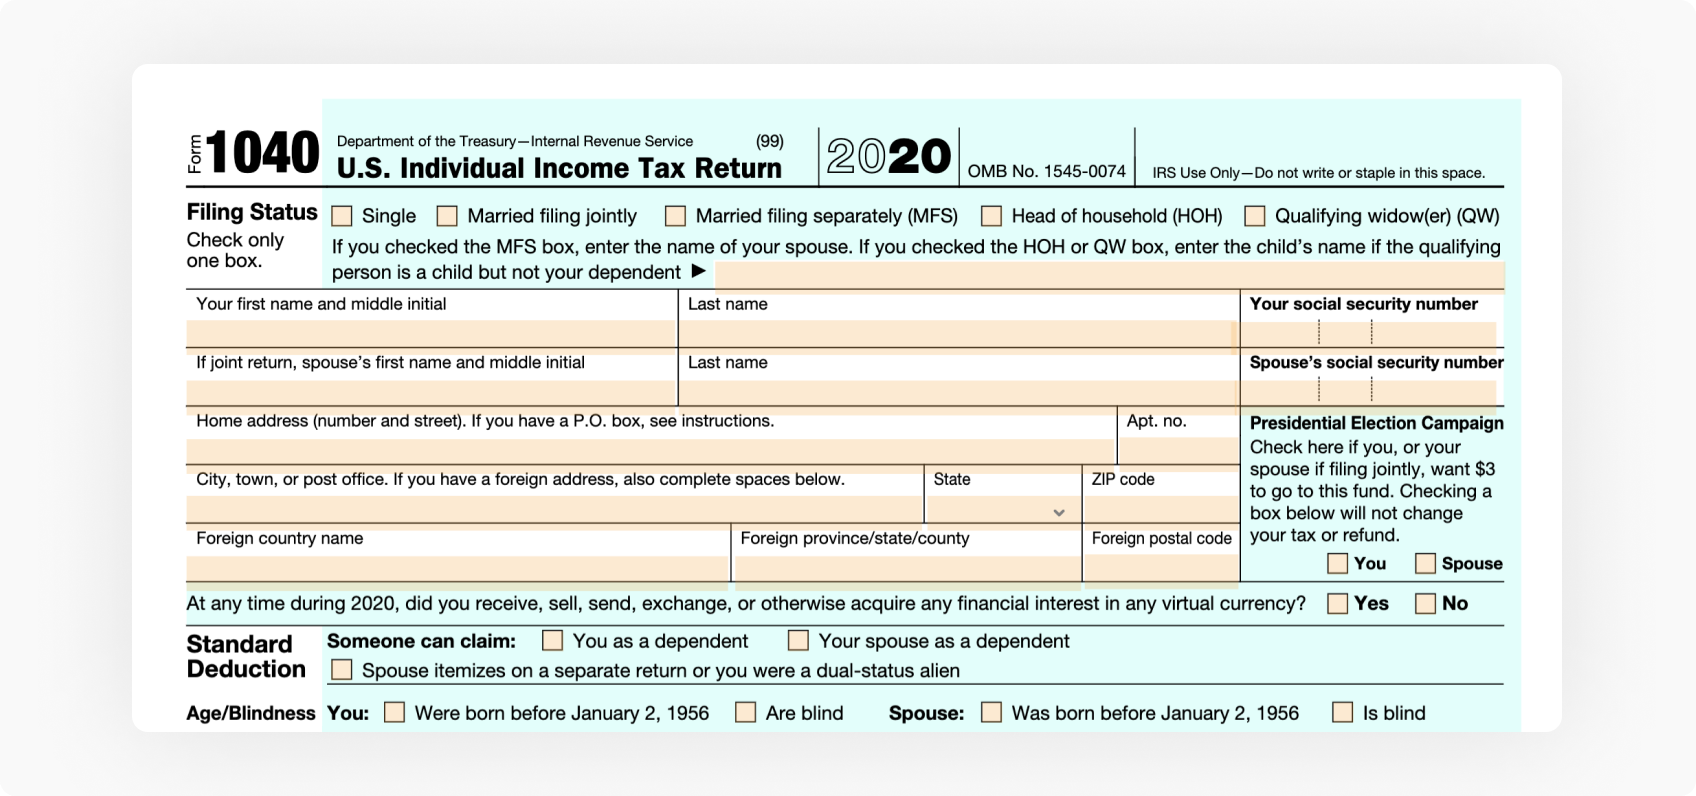 IRS form 1040 is filed to submit an individual tax return to the IRS